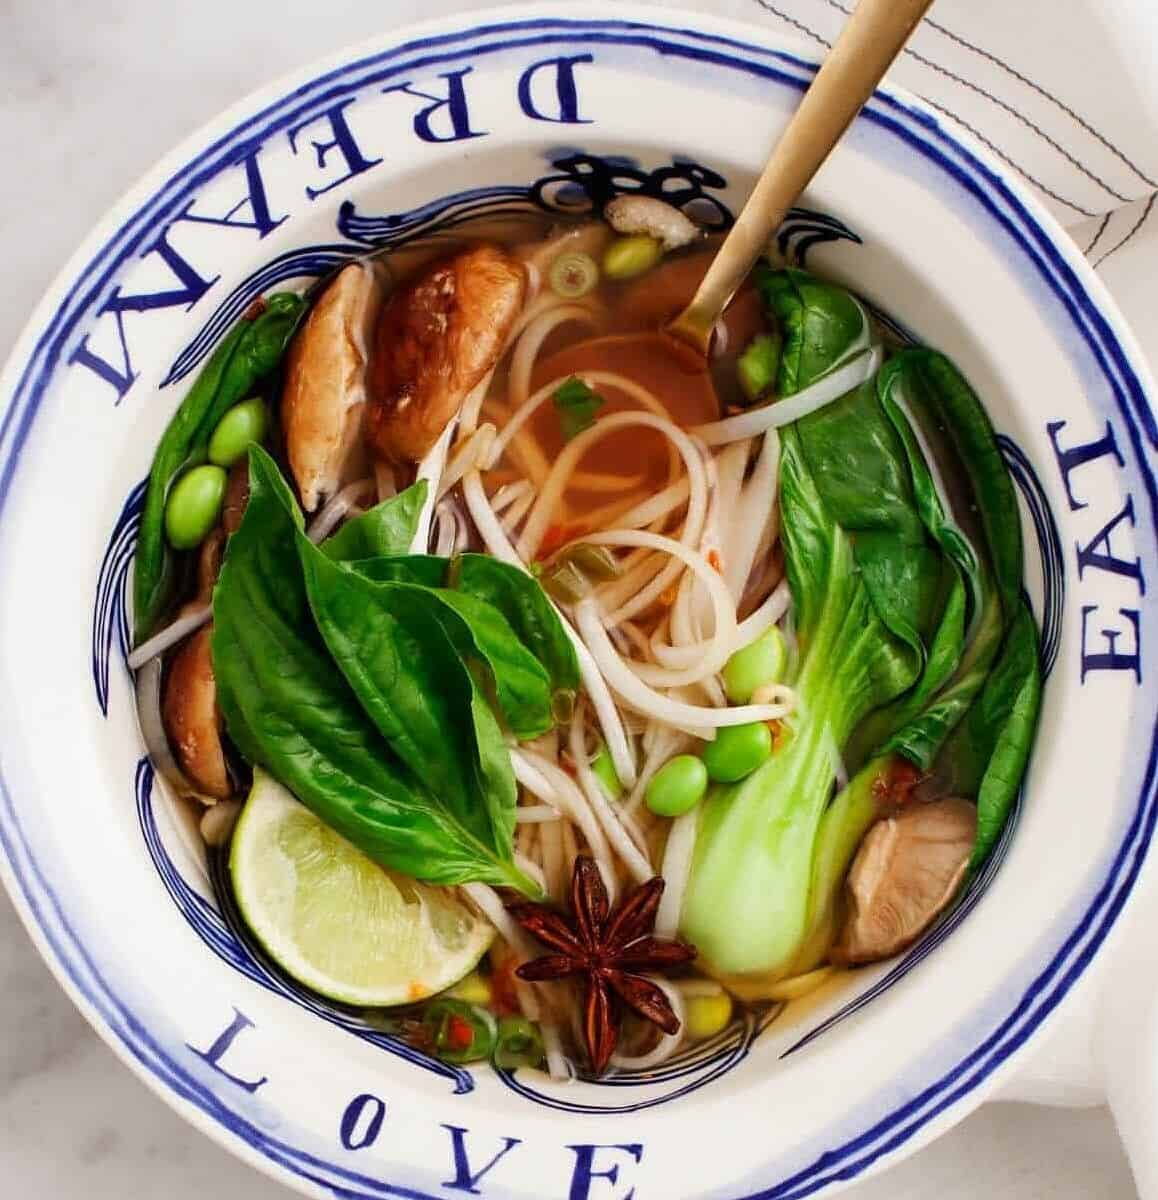  This delicious and aromatic broth is perfect for a quick and healthy meal.